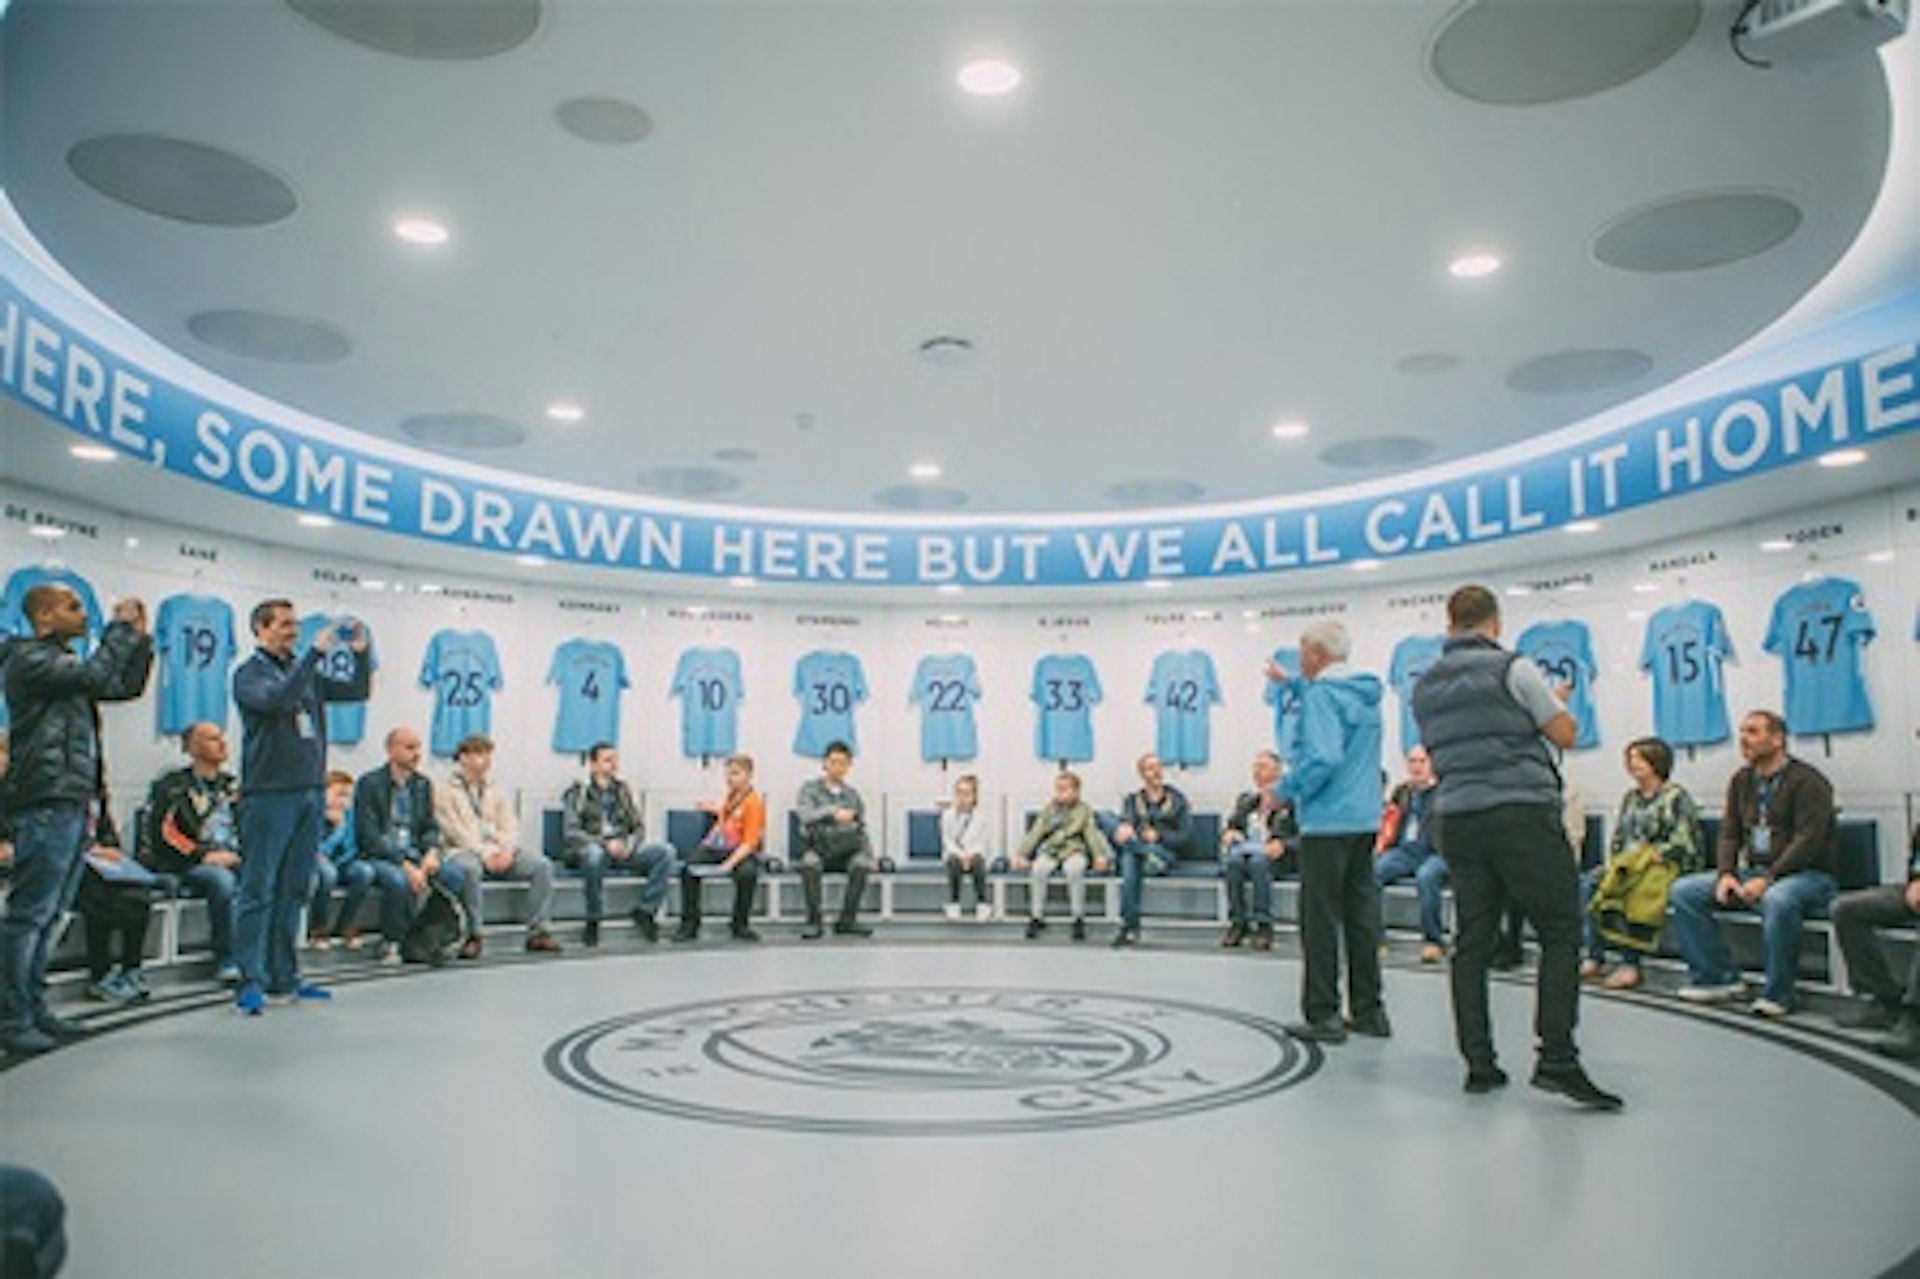 Manchester City Football Club Stadium Tour for Two Adults 3